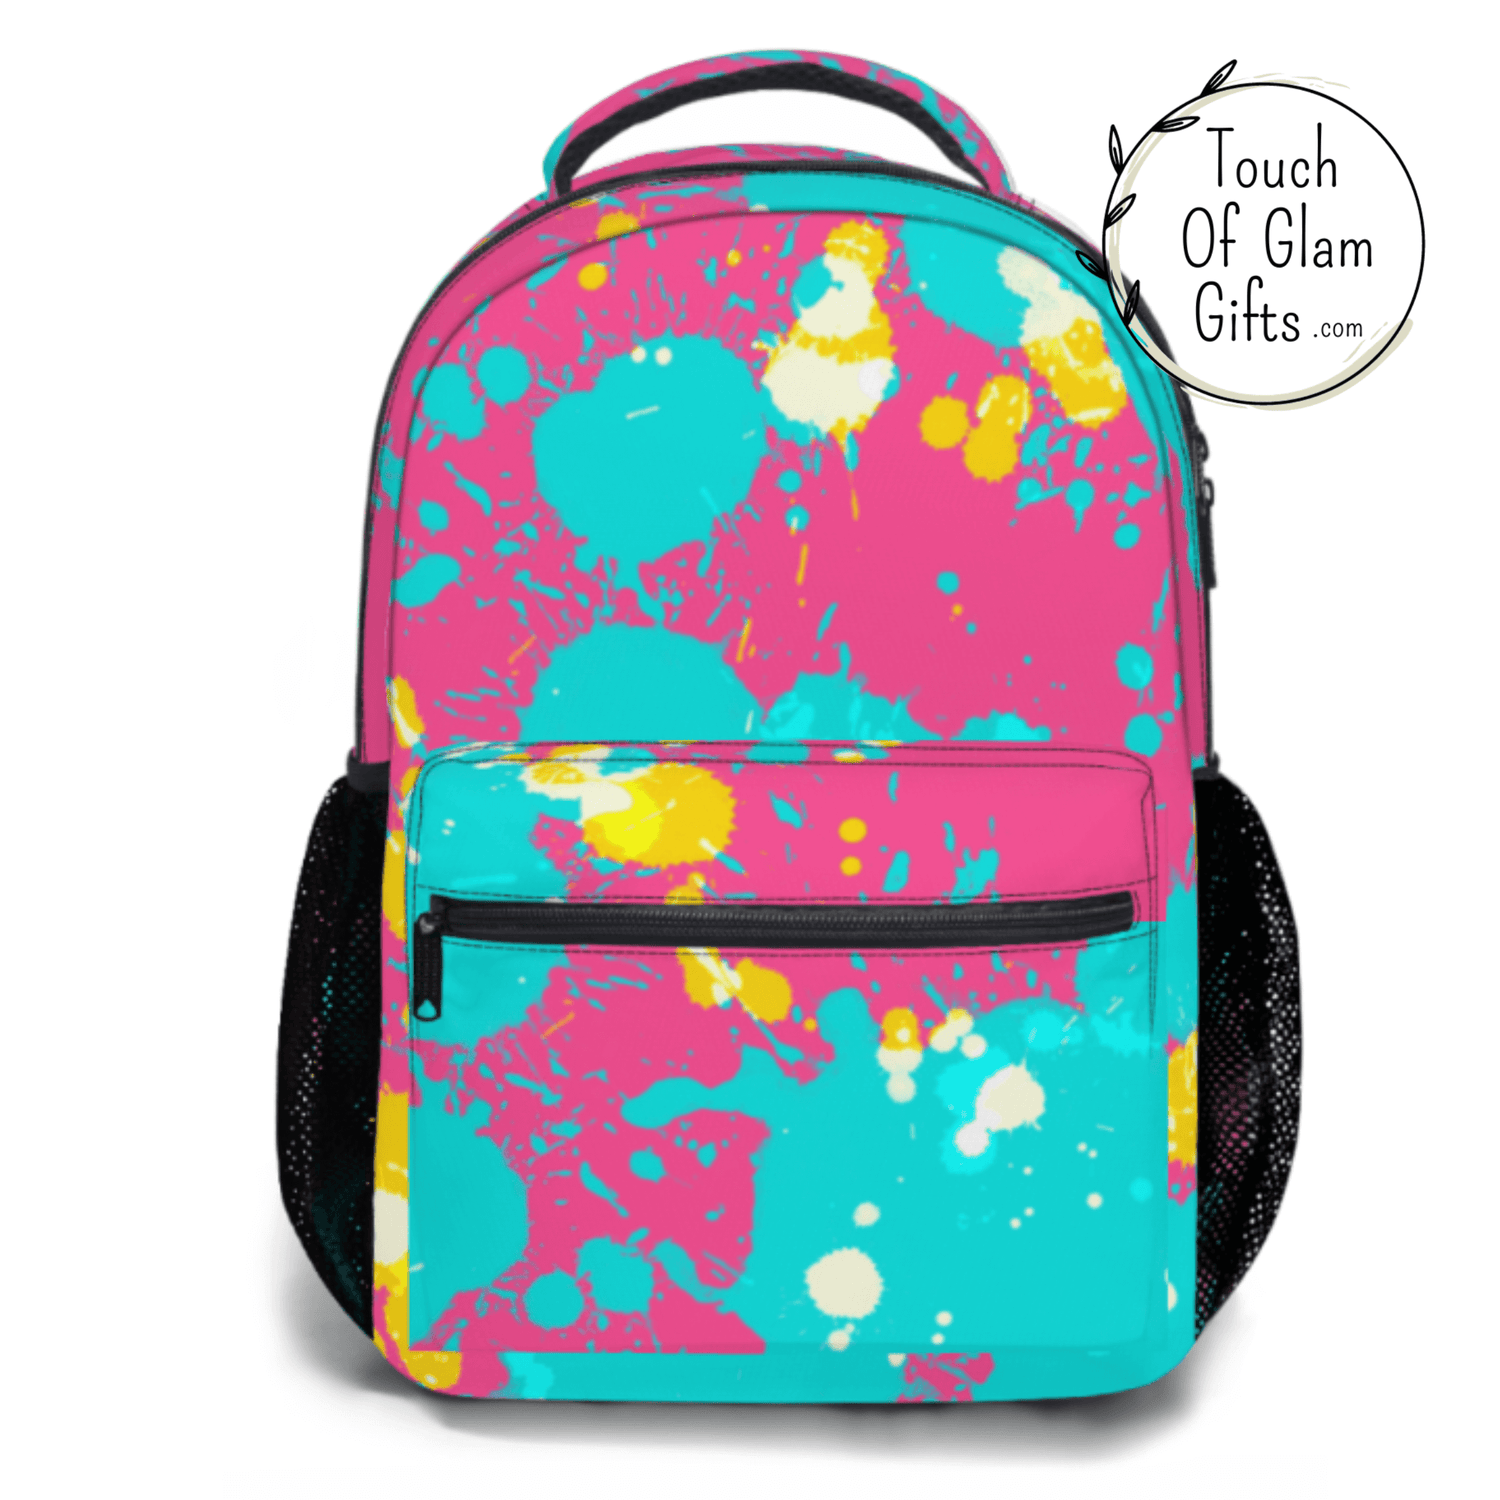 backpacks for kids. This pink and turquoise paint splatter with dabs of yellow is a one of a kind backpack.